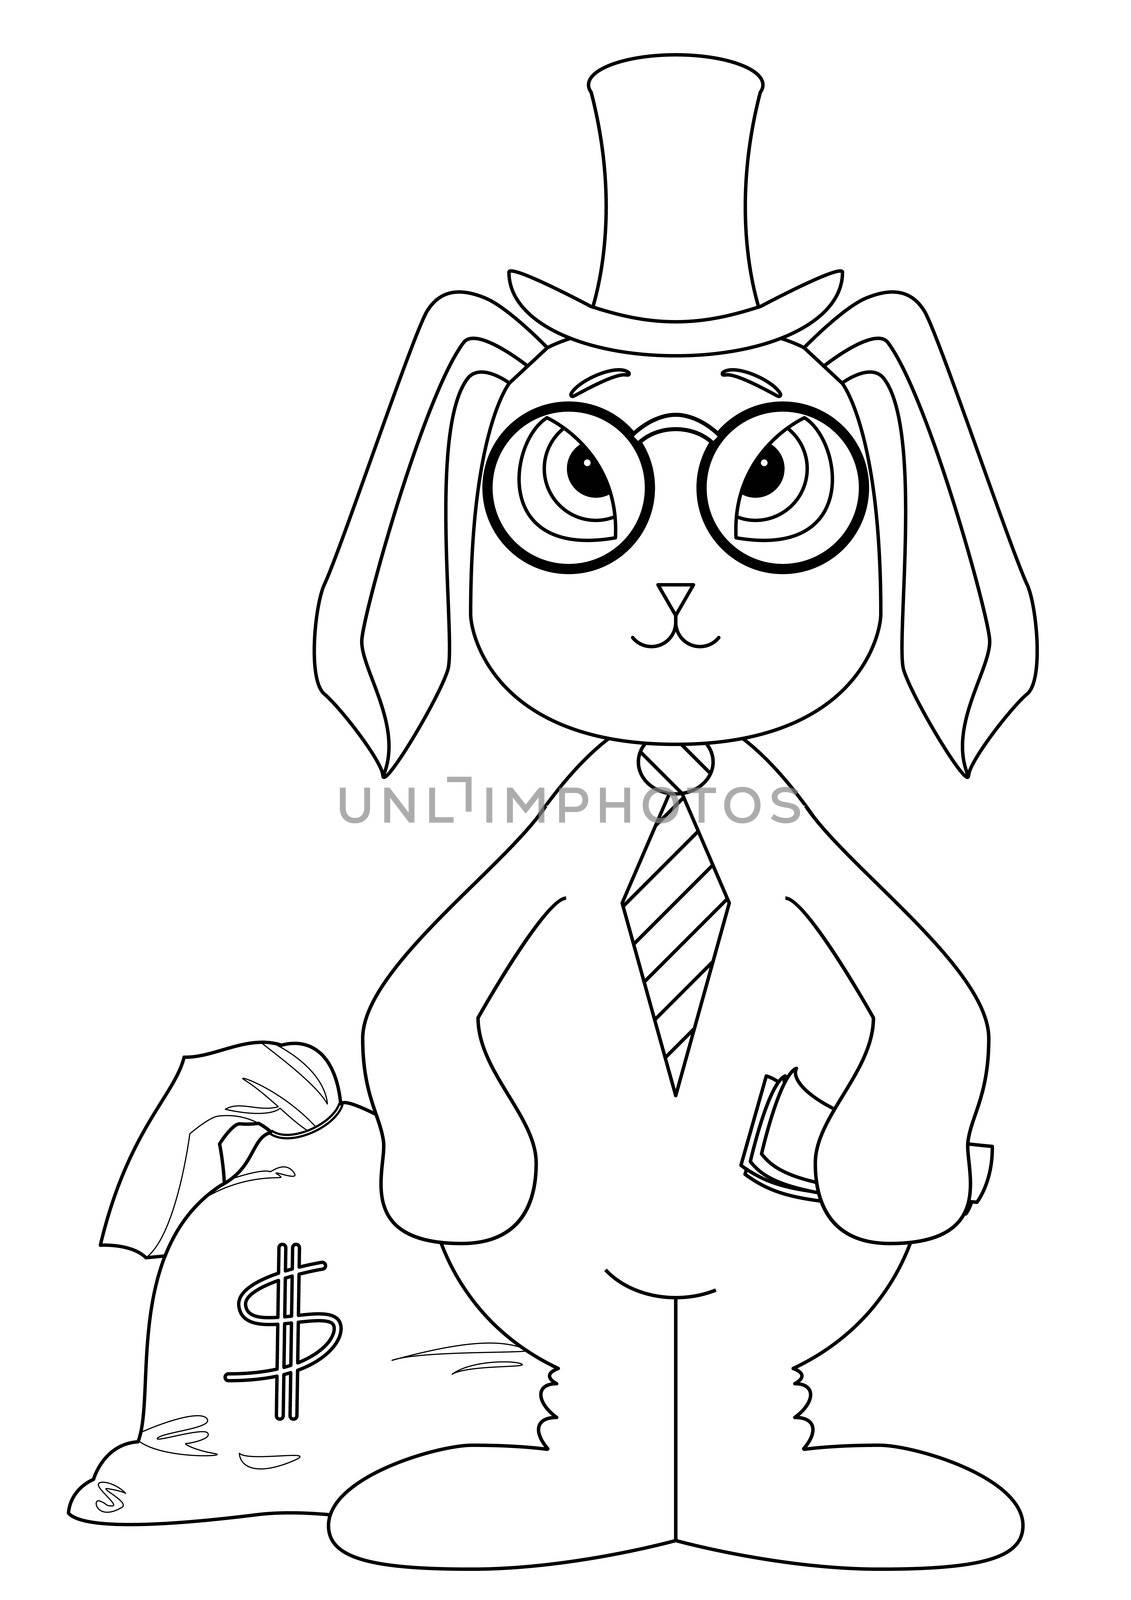 Banker rabbit rich with a bag filled with money, contours